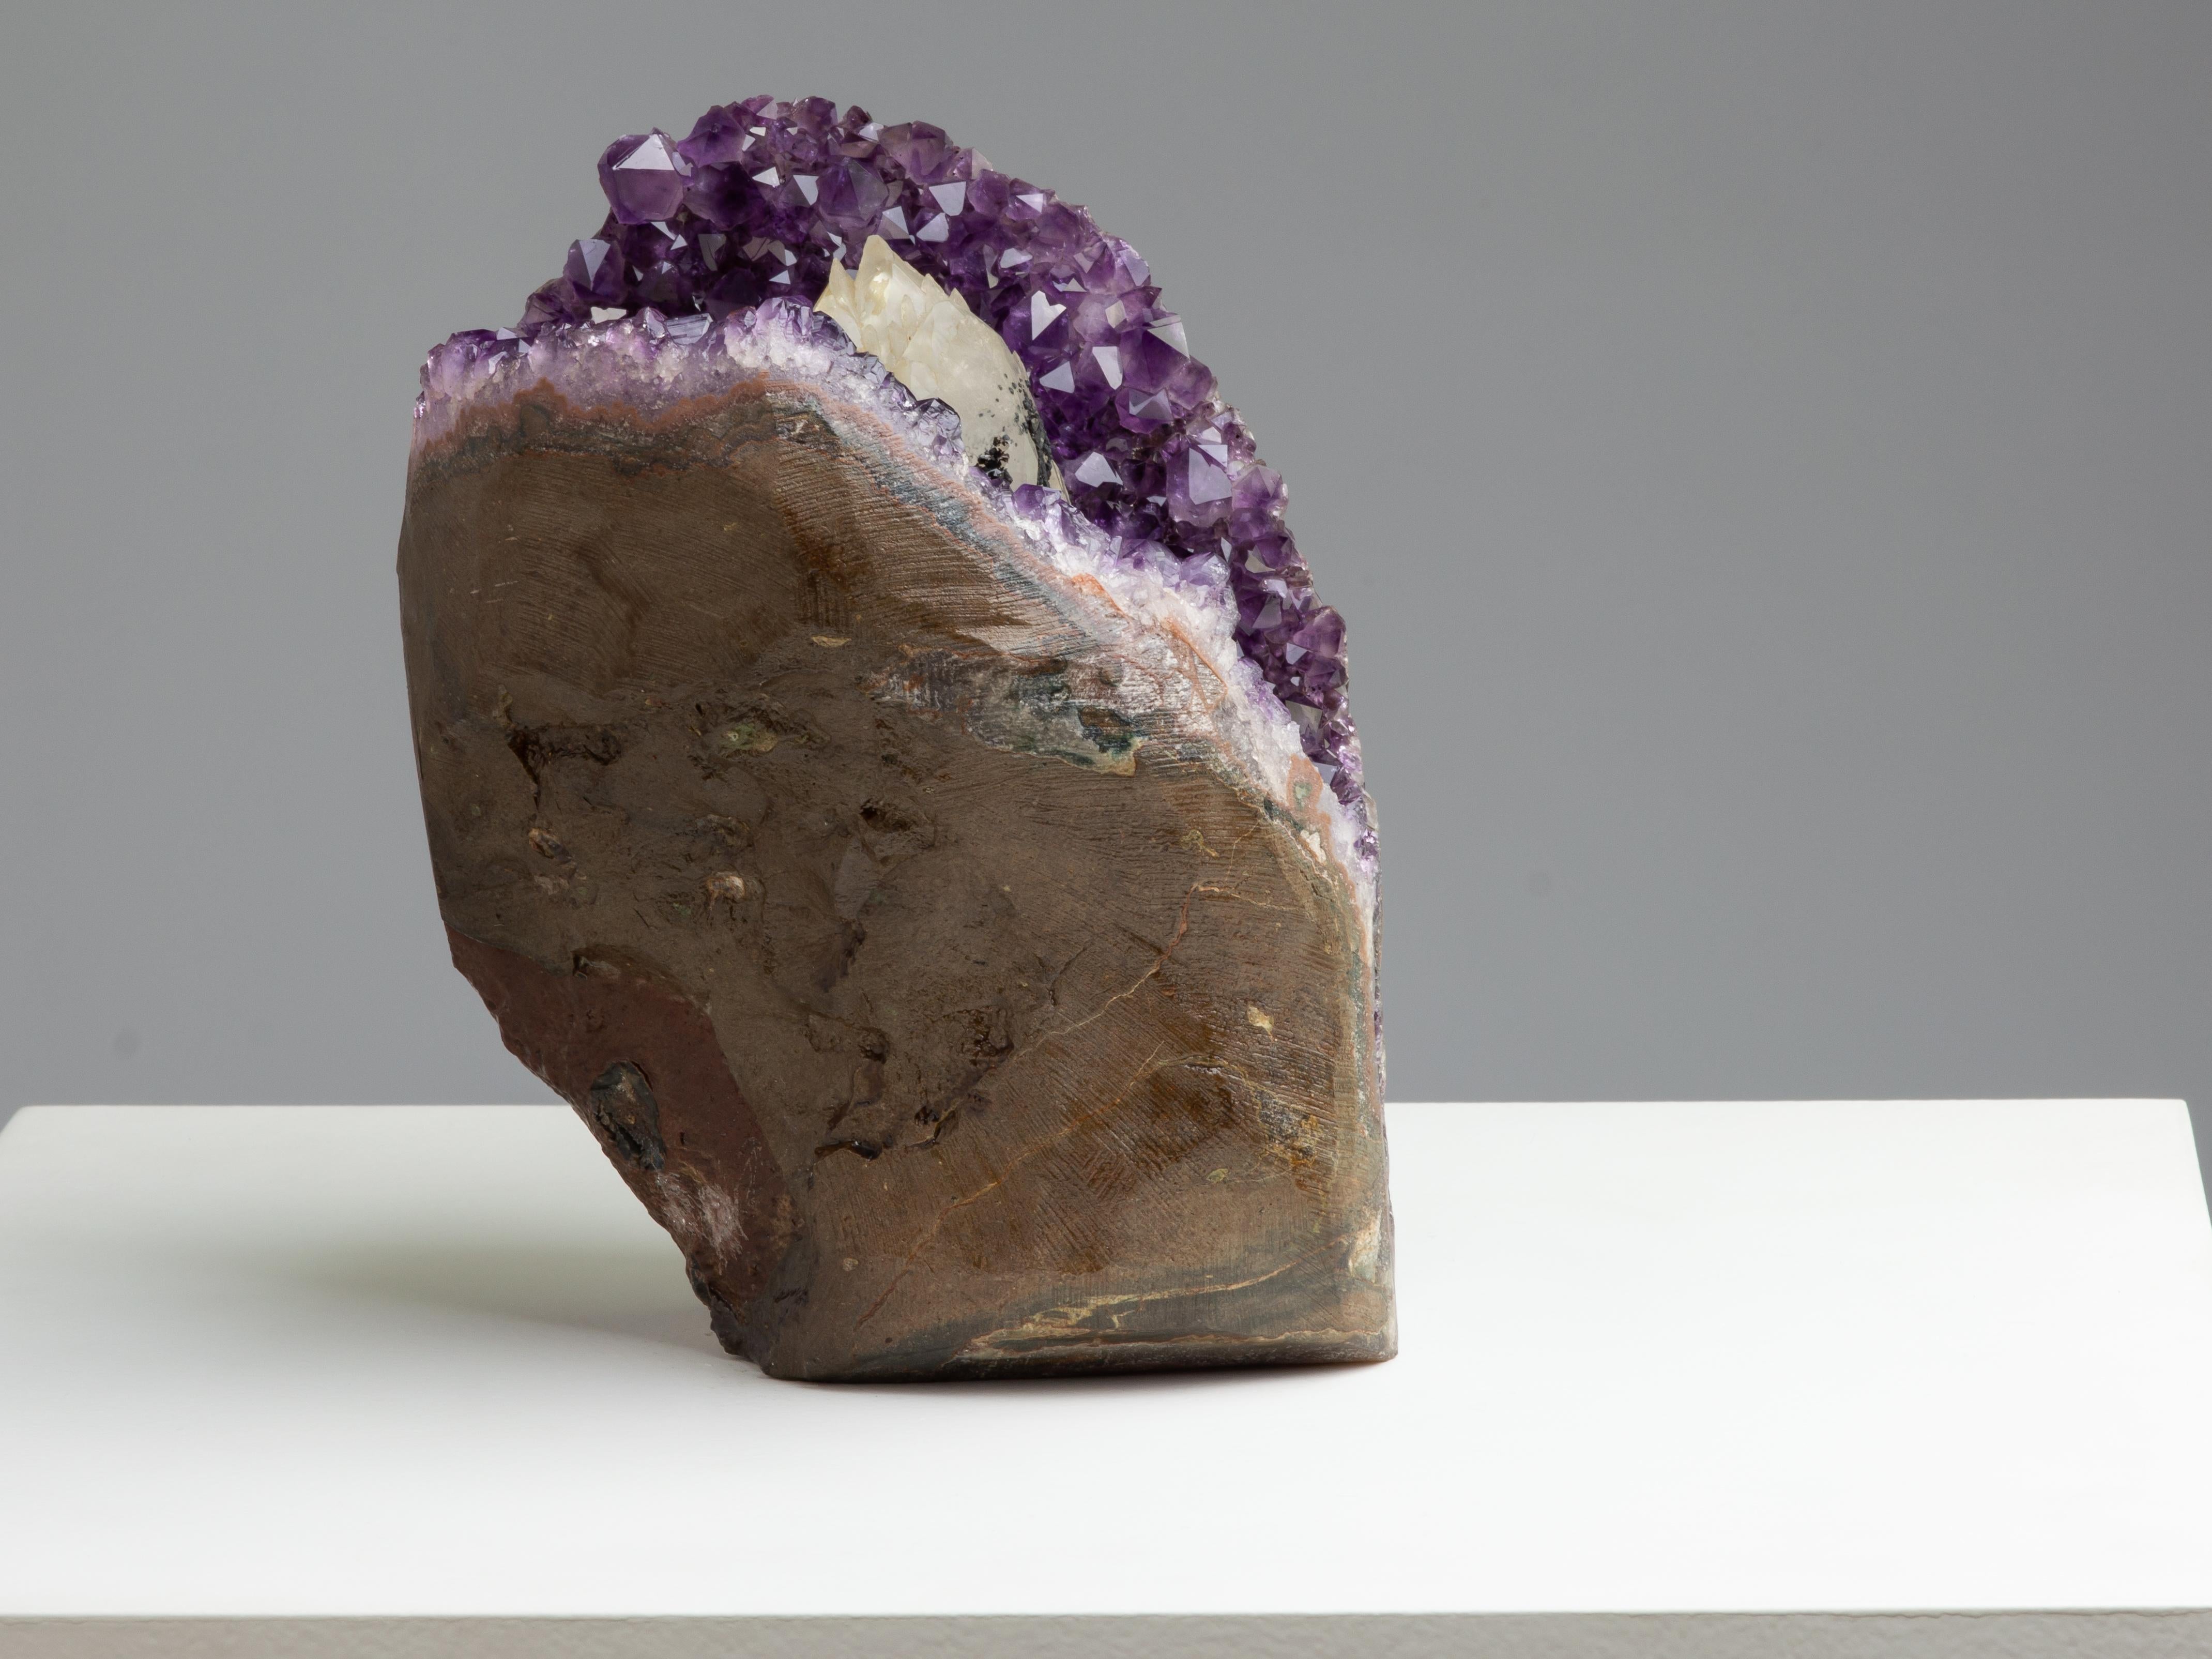 An exceotional geode cluster with deep purple Amethyst crystals with a central calcite covered with a blanket of Goethite.

A stunning, rare piece with an incredible shape resembling an 